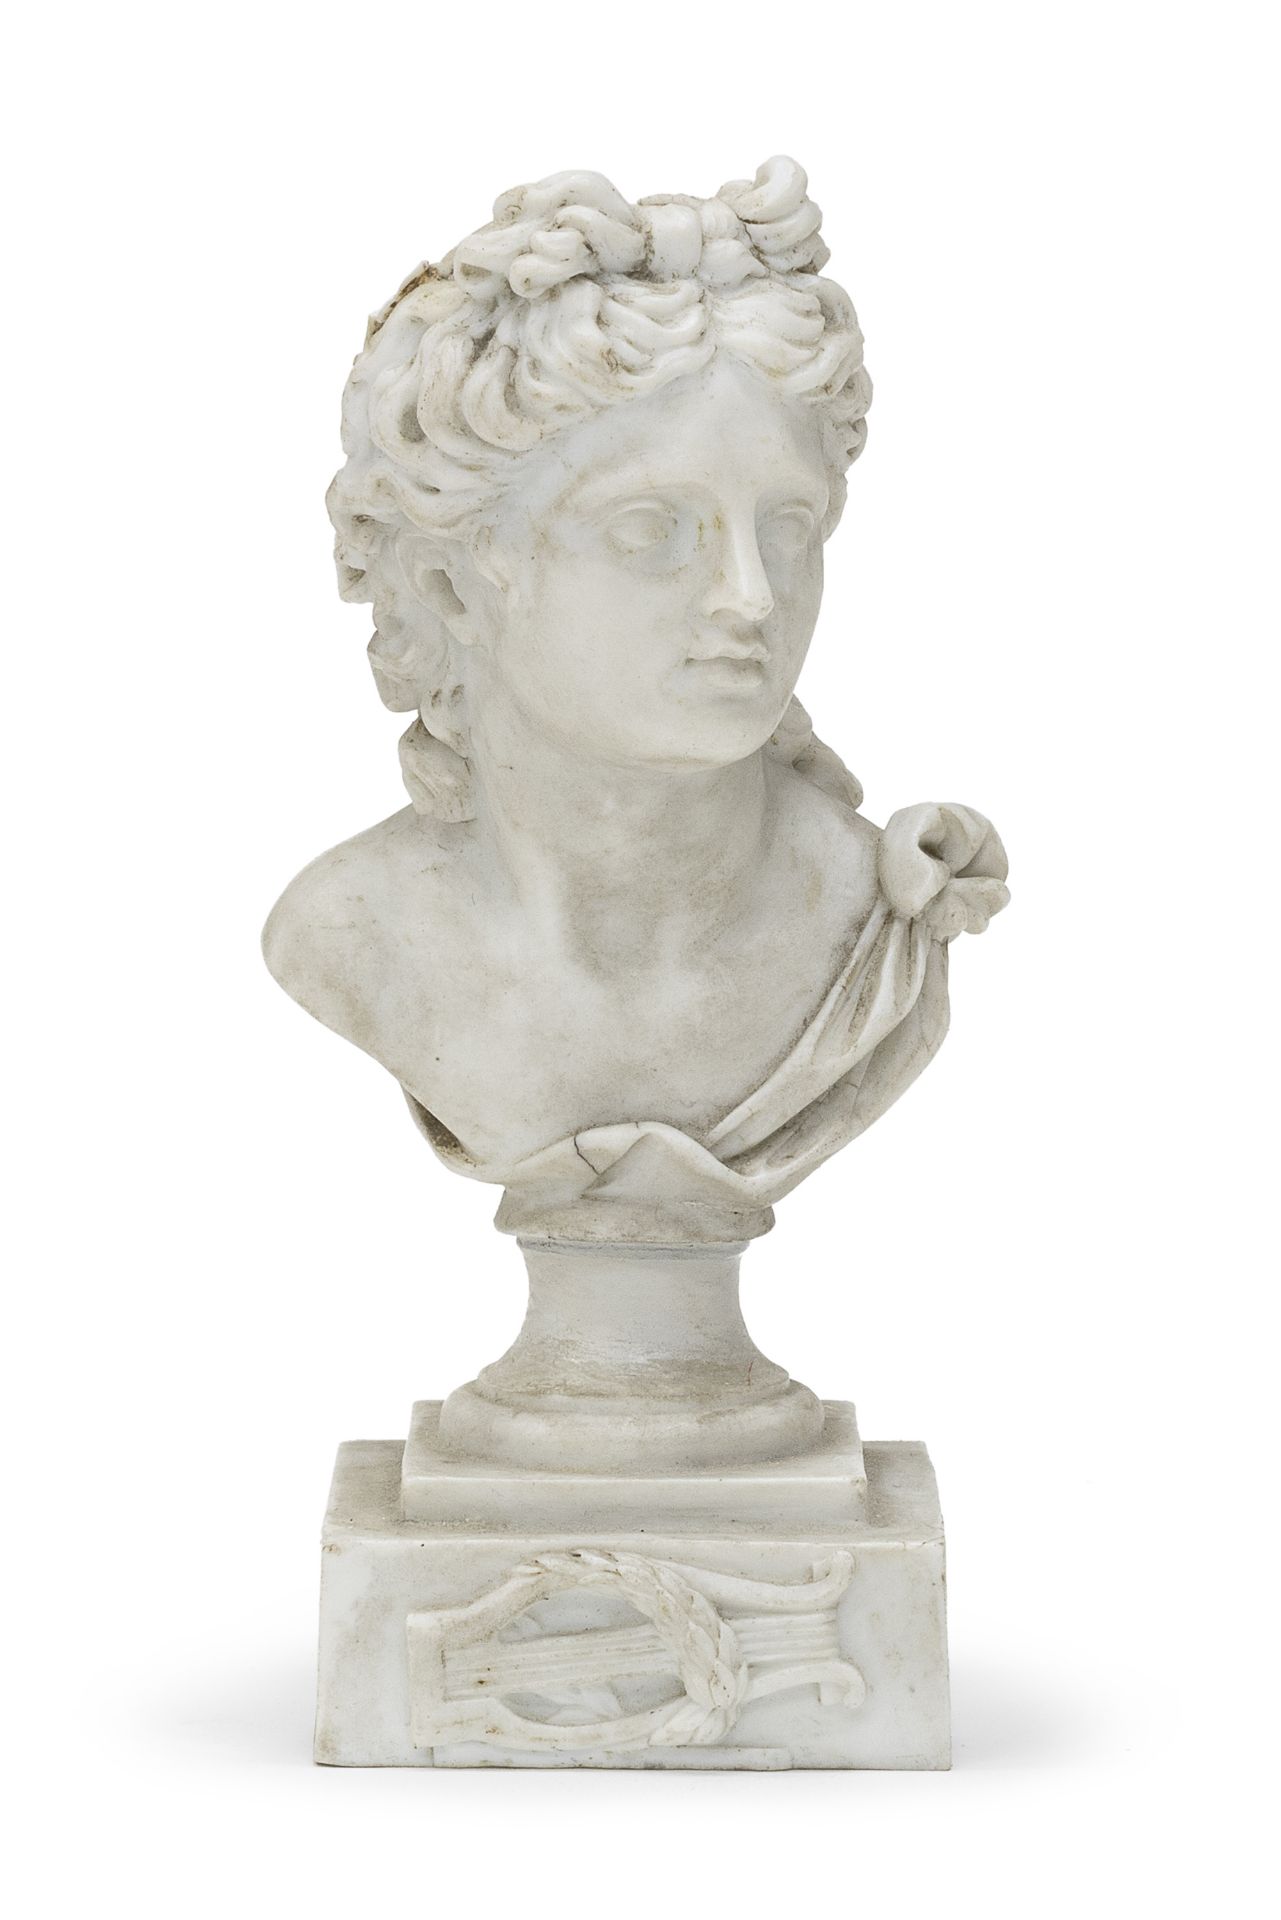 SMALL BISCUIT BUST 19th CENTURY